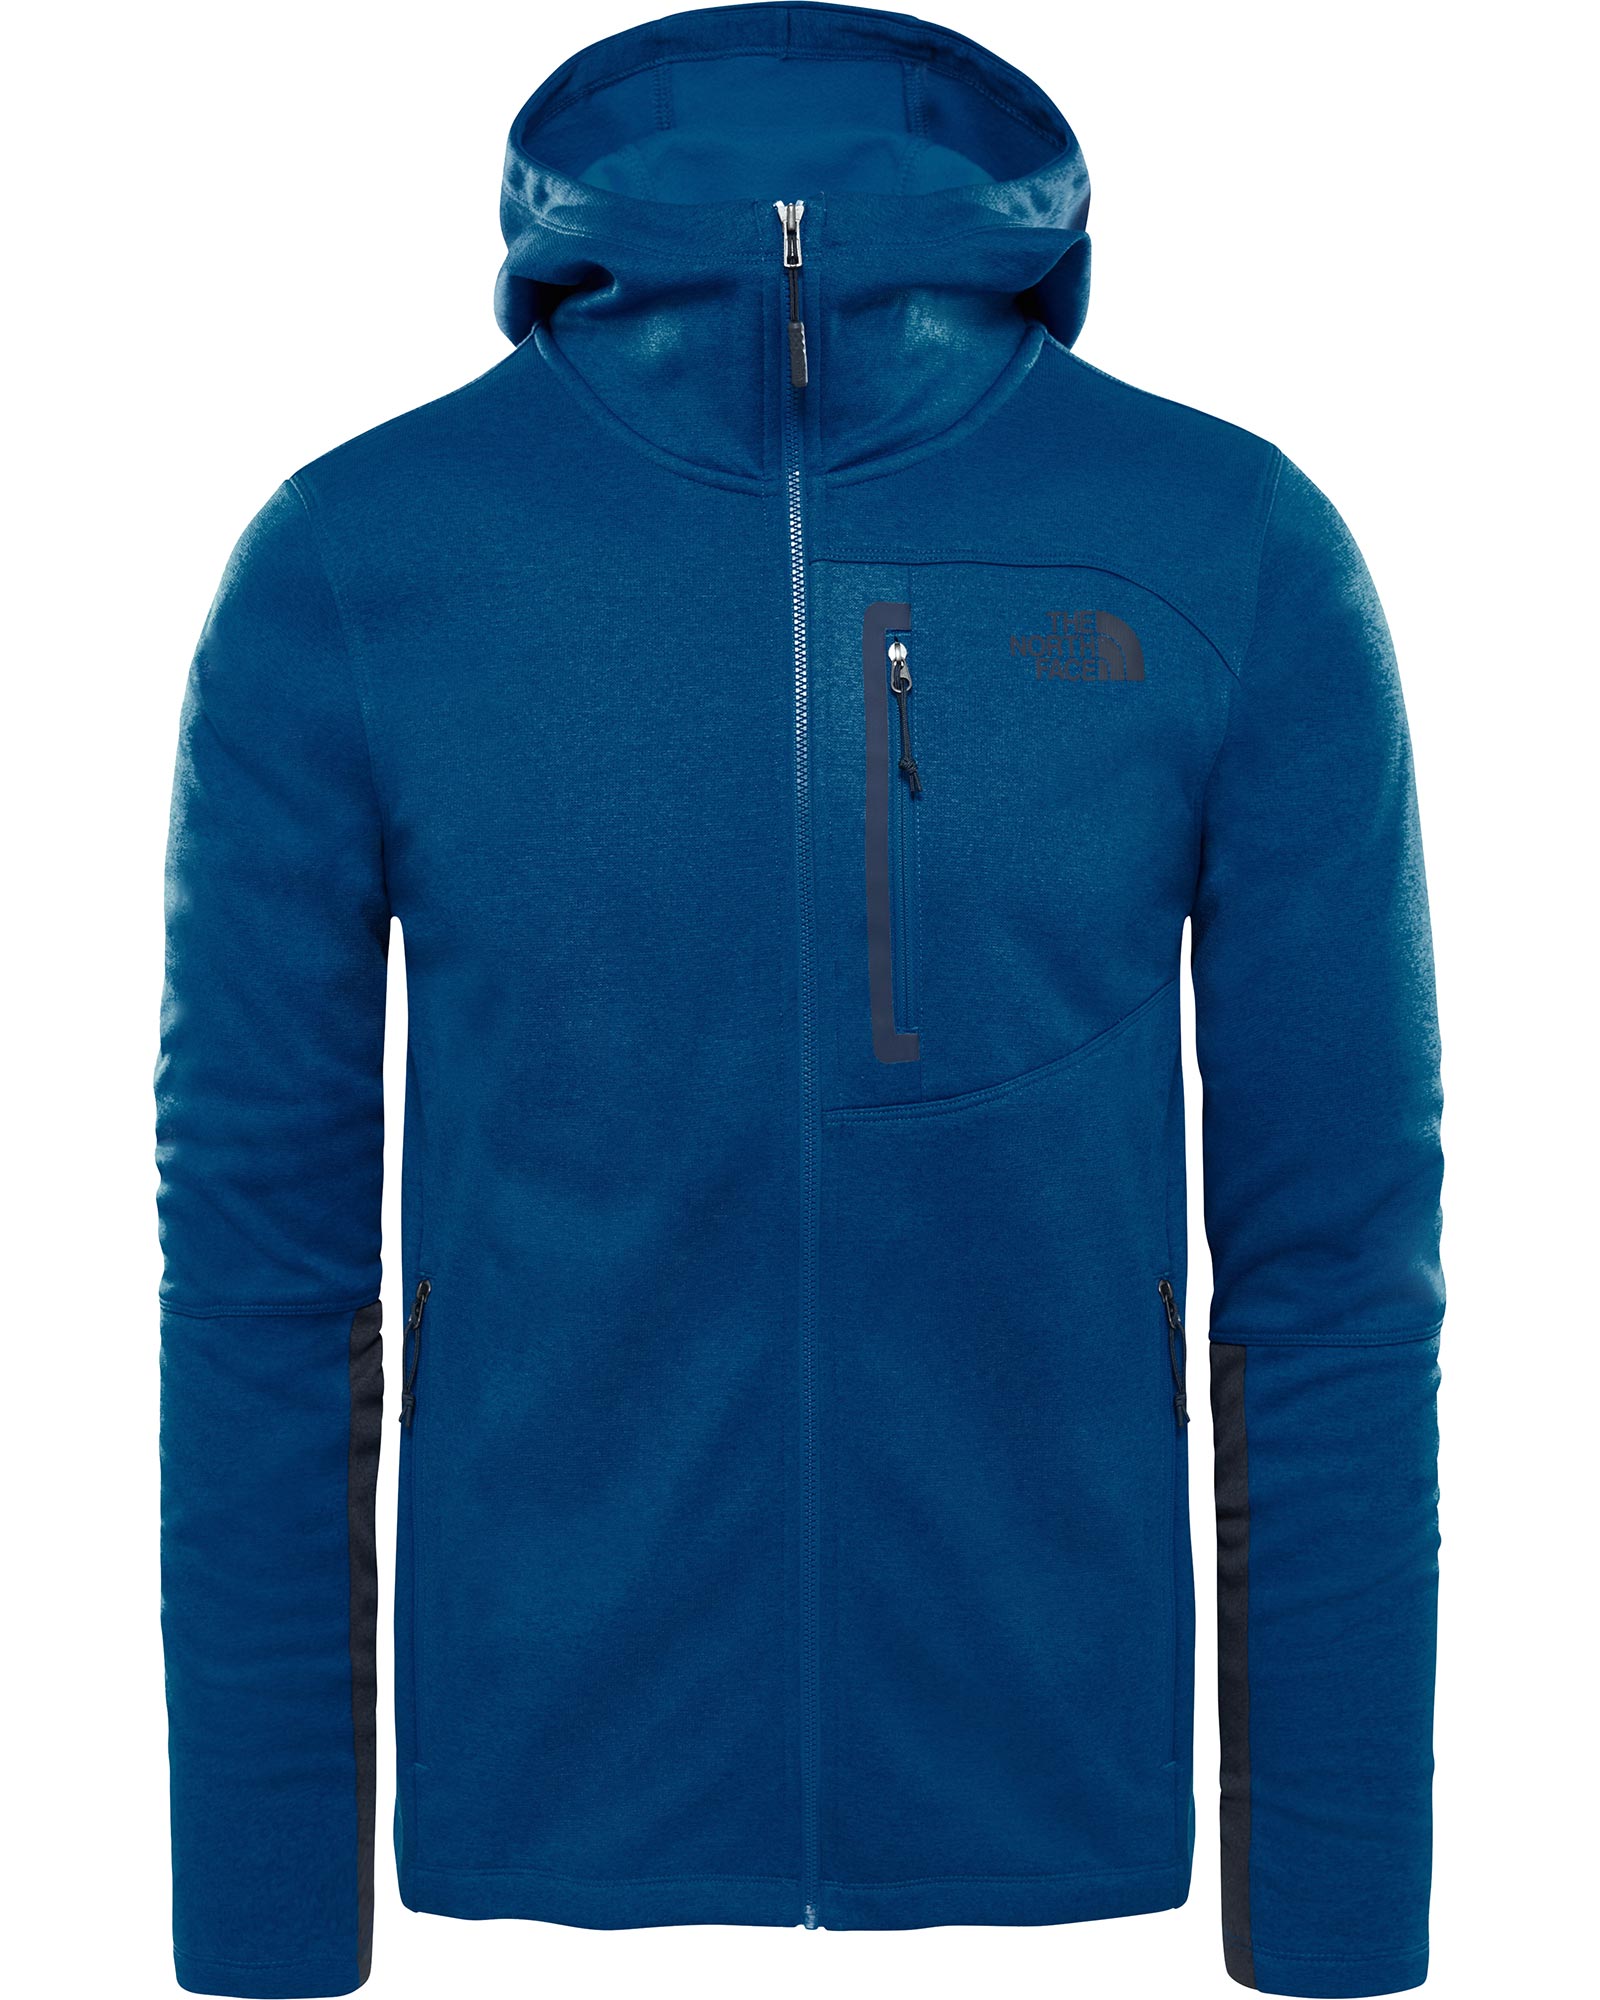 The North Face Canyonlands Men’s Hoodie - Monterey Blue Heather XS